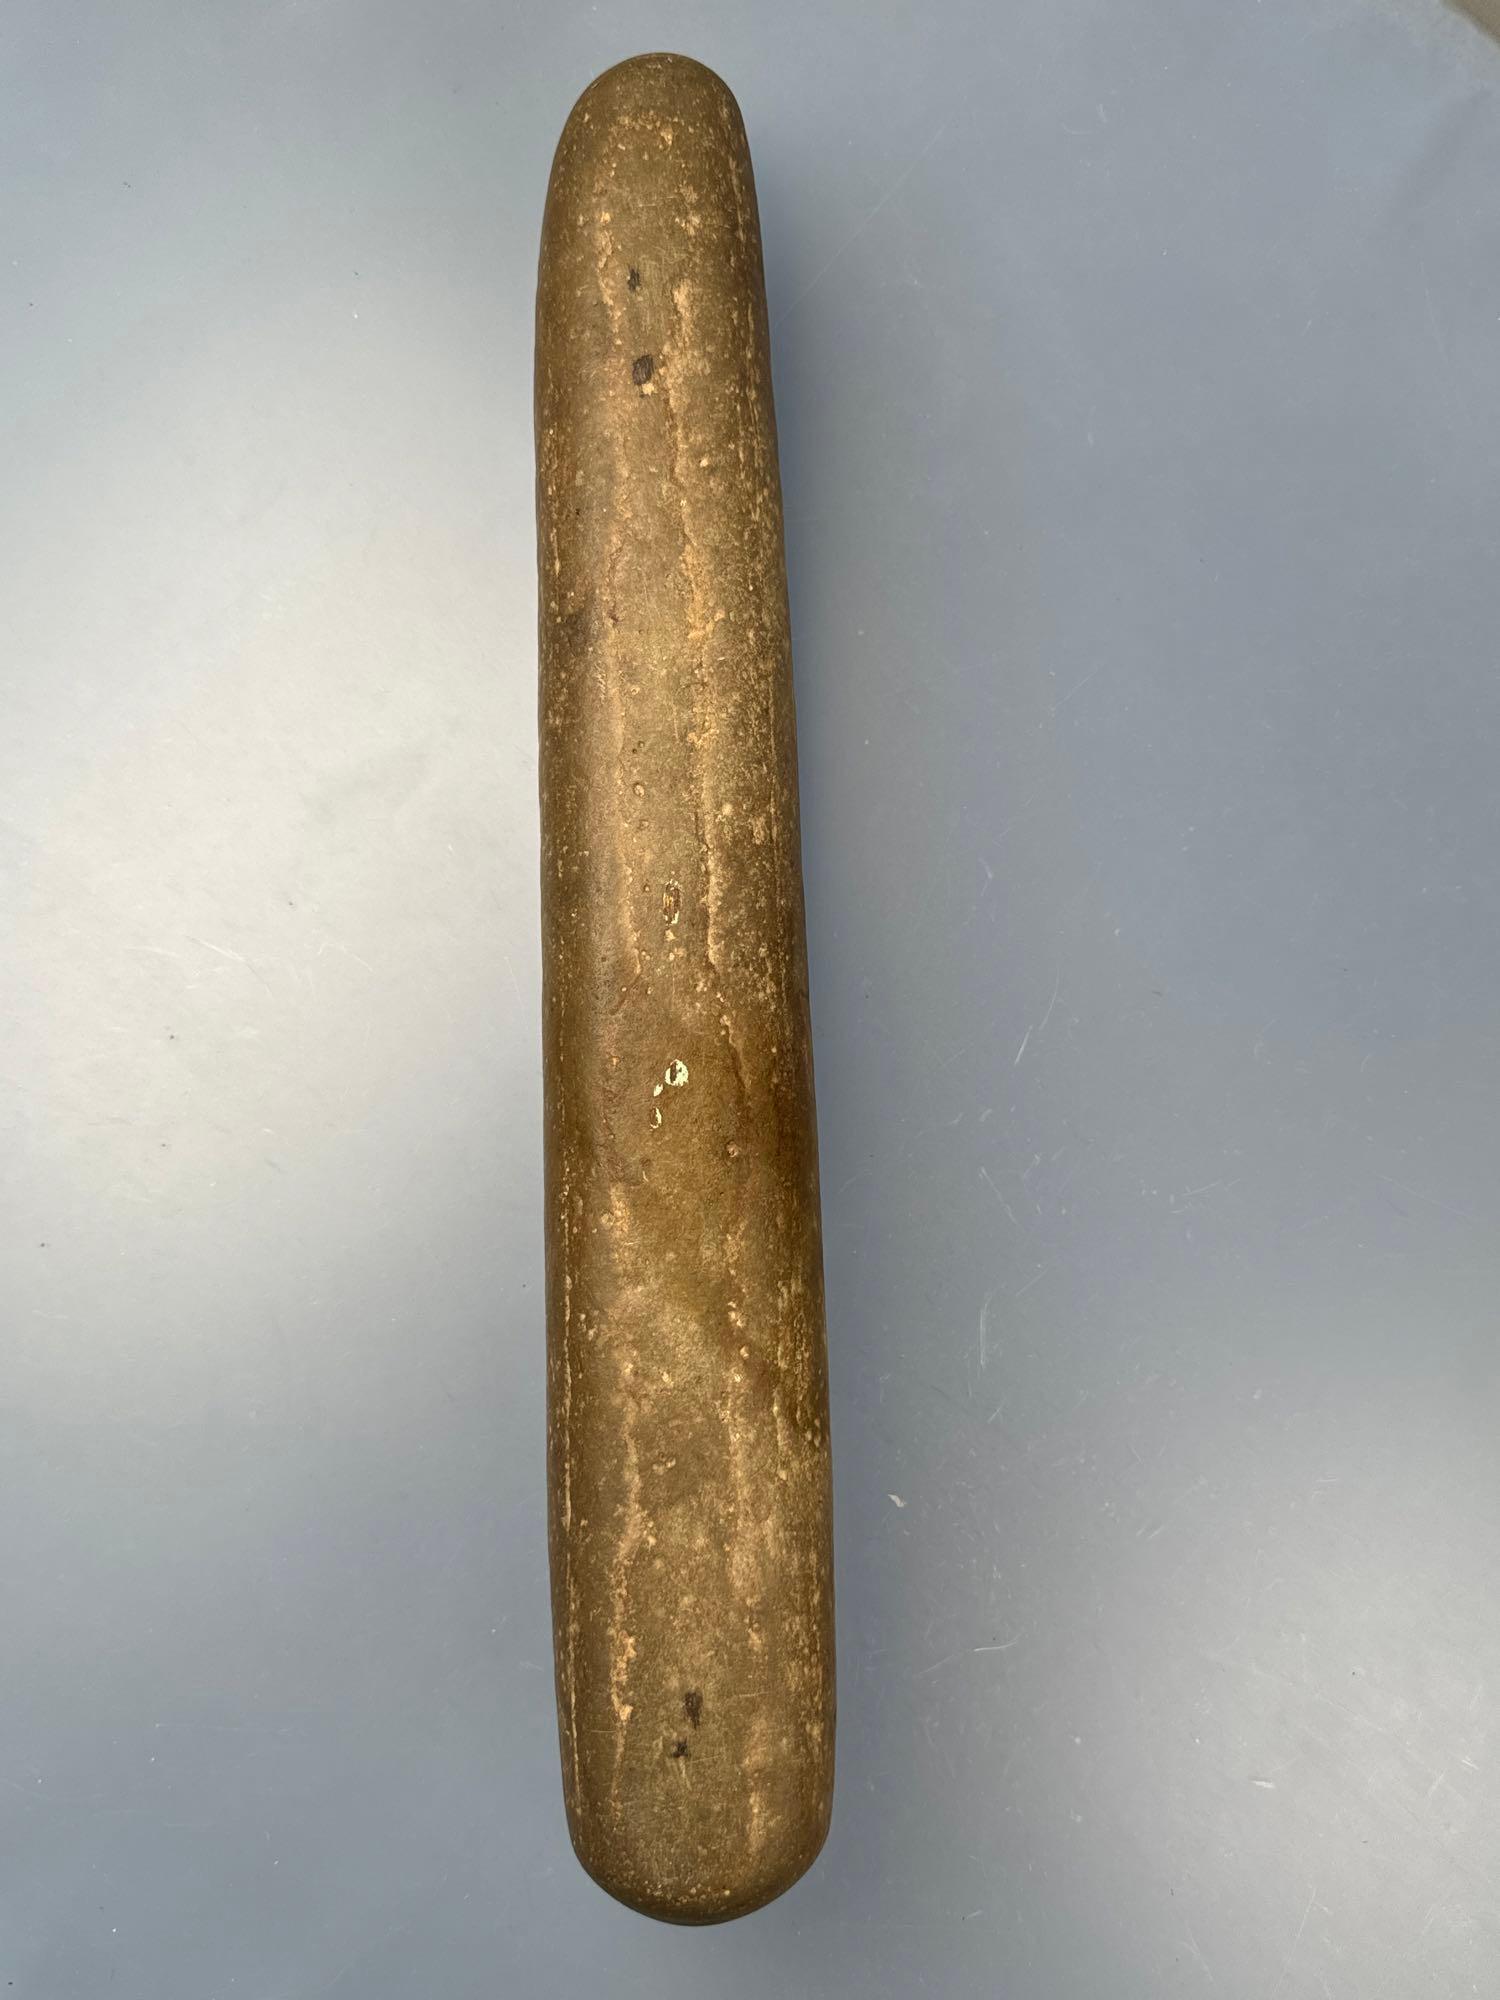 HUGE 16 1/4" Polished Pestle, Well-Made Example, Found near the Delaware River in Pennsylvania